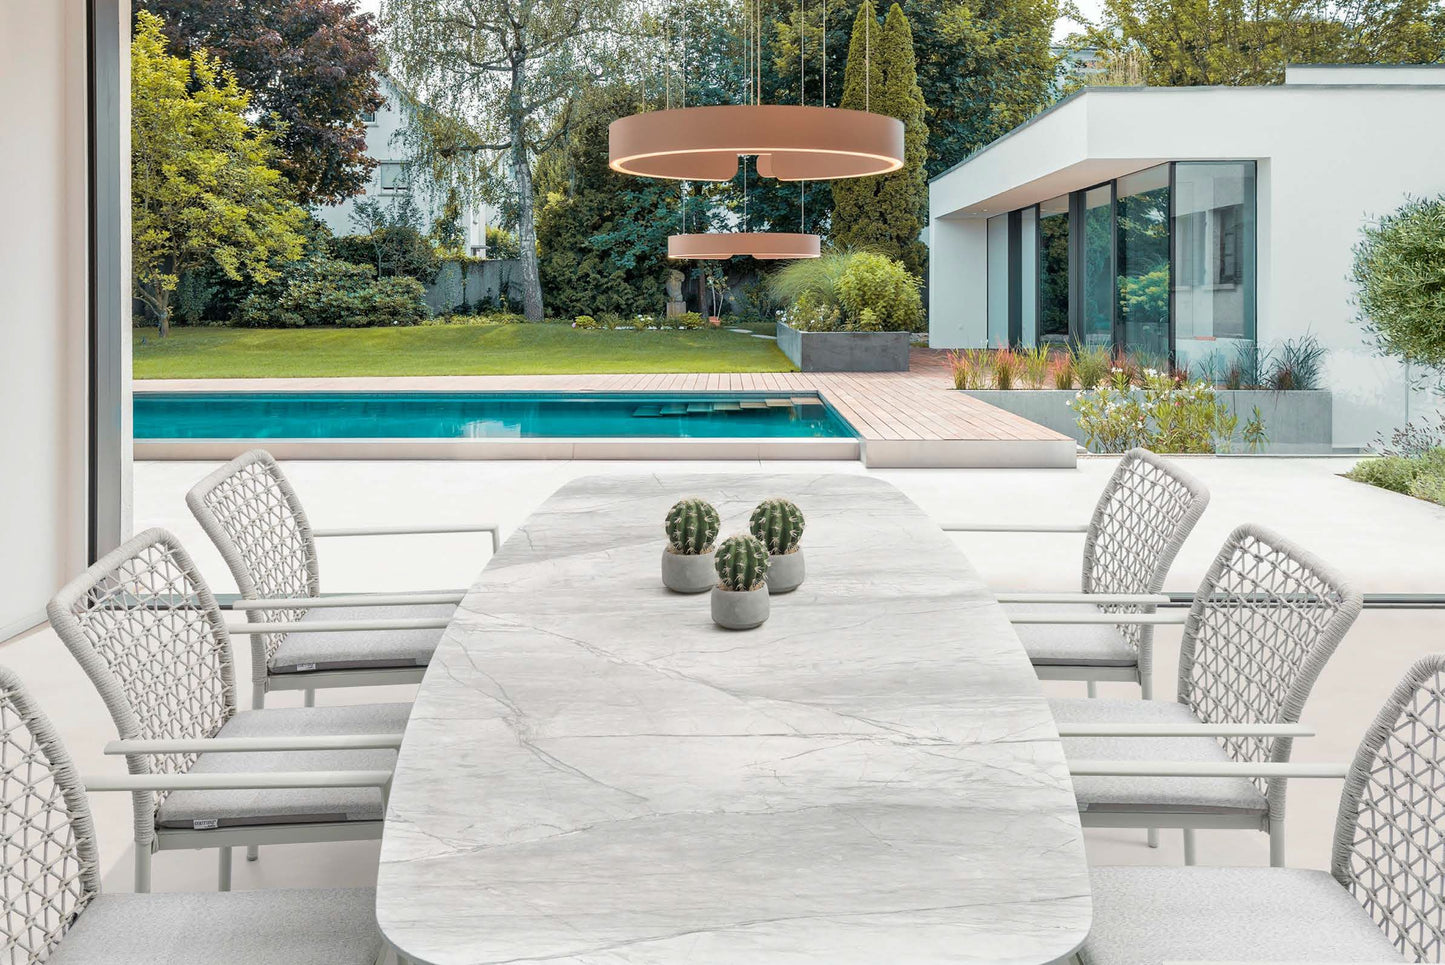 Couture Jardin | Club | Outdoor Rectangular Dining Table NEW